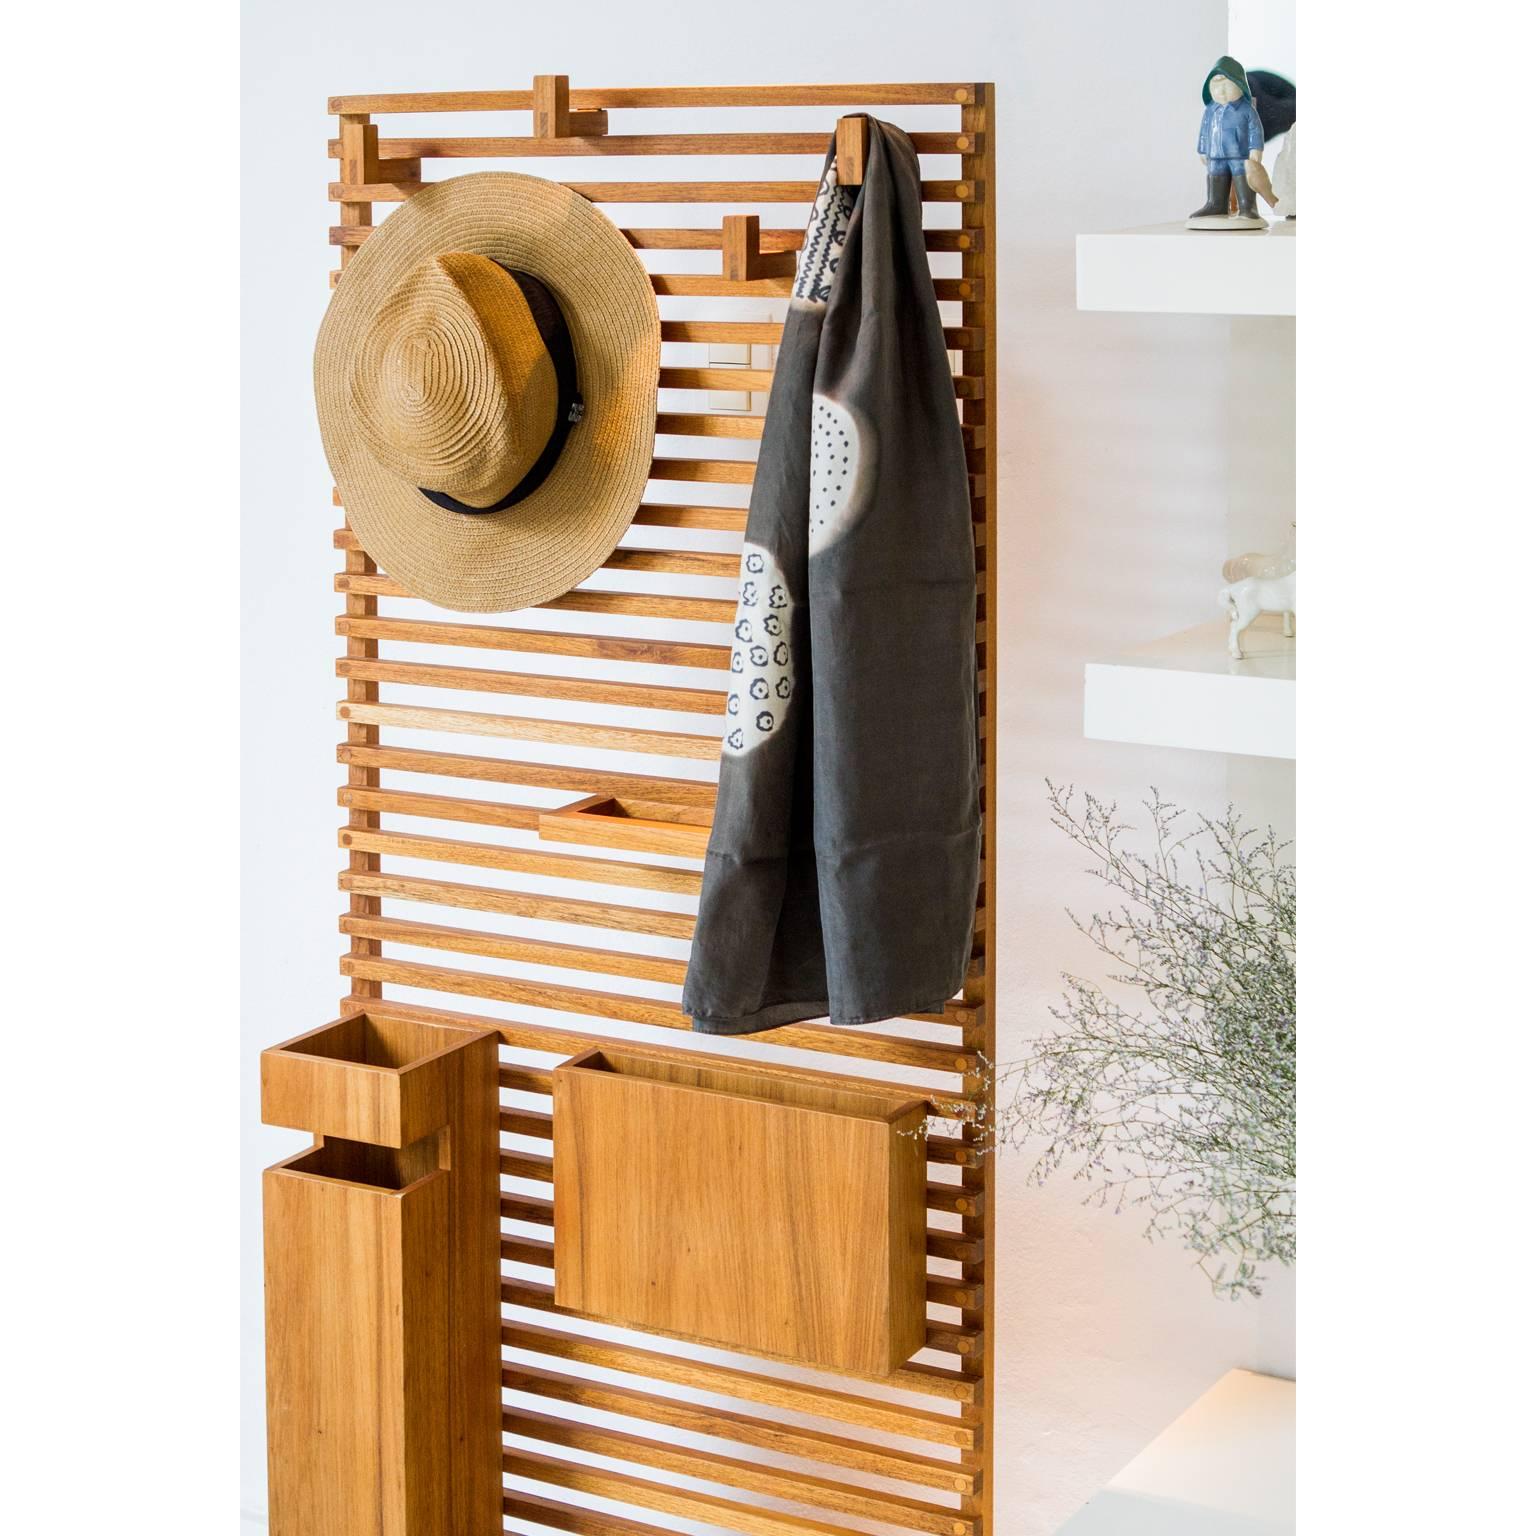 Hand-Crafted Coat Hanger Clau Made of Tropical Wood in Brazilian Contemporary Design For Sale